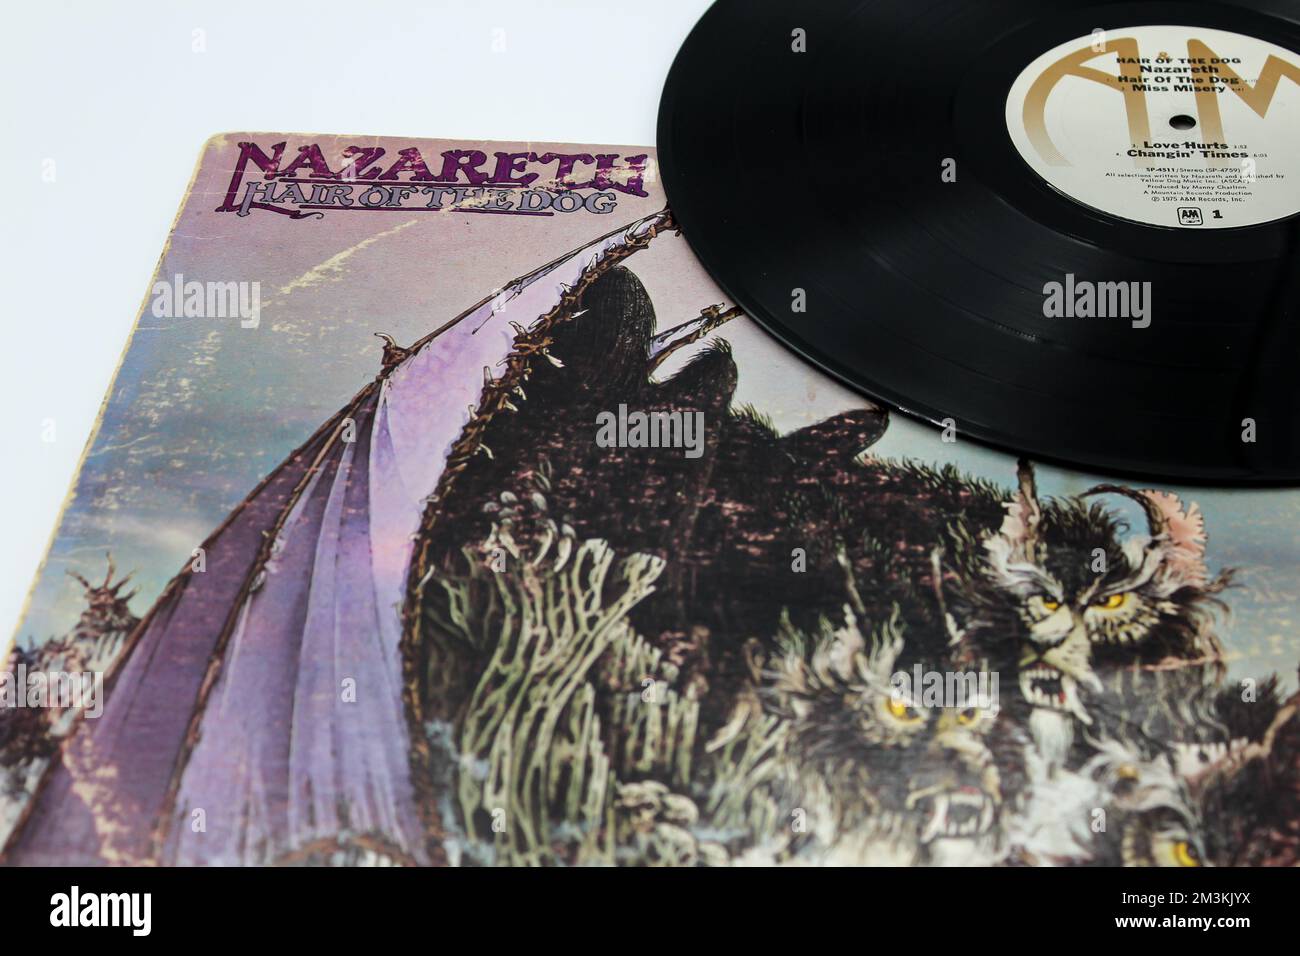 Hair of the Dog is the sixth studio album by the Scottish hard rock band Nazareth on vinyl record LP album cover. Stock Photo